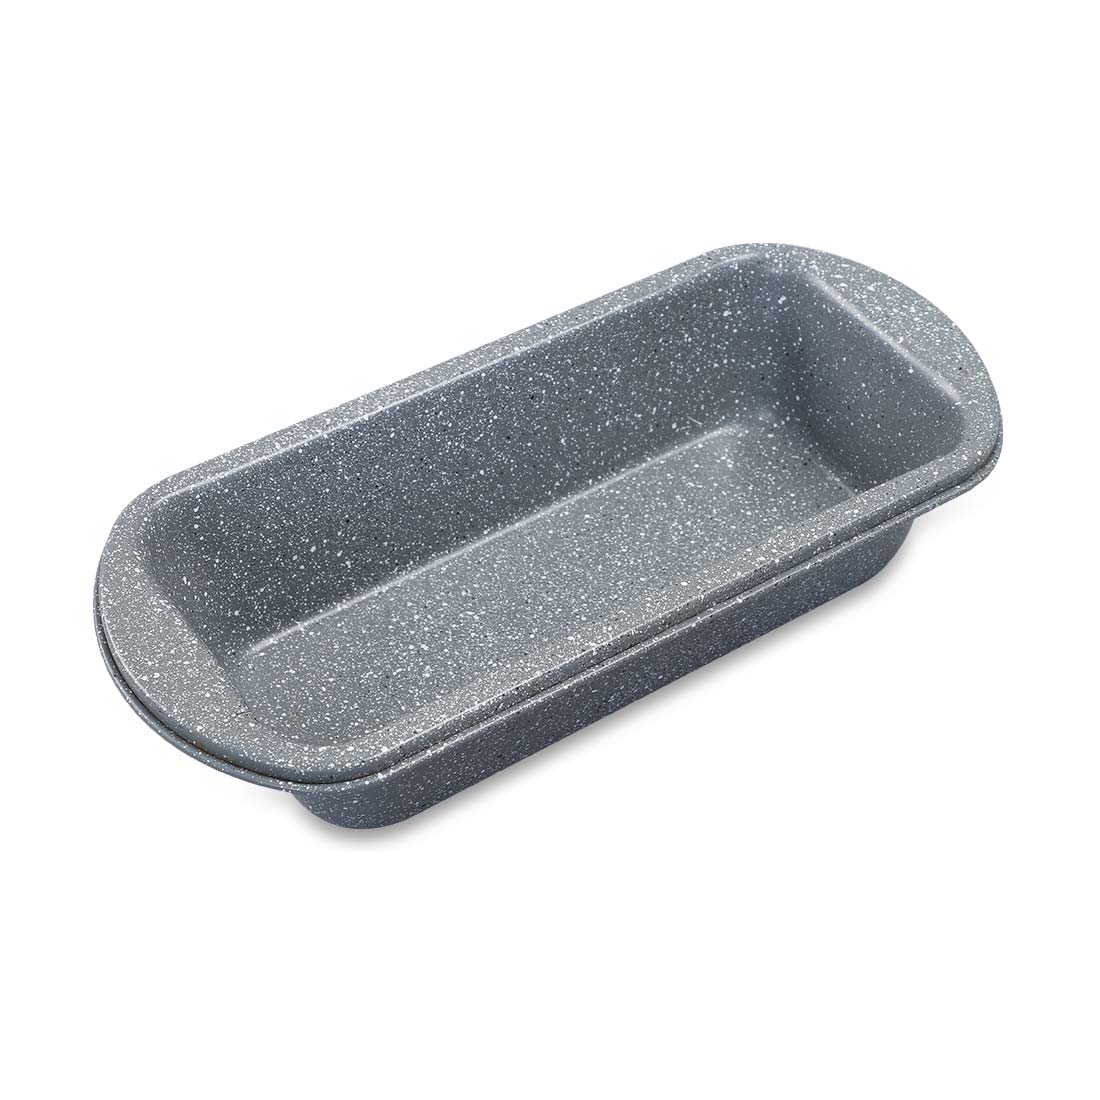 Loaf Pan Carbon Steel Non-Stick Loaf Tin Bread Mould Rectangle Baking Pan Cake Maker Mold Oven Tray 